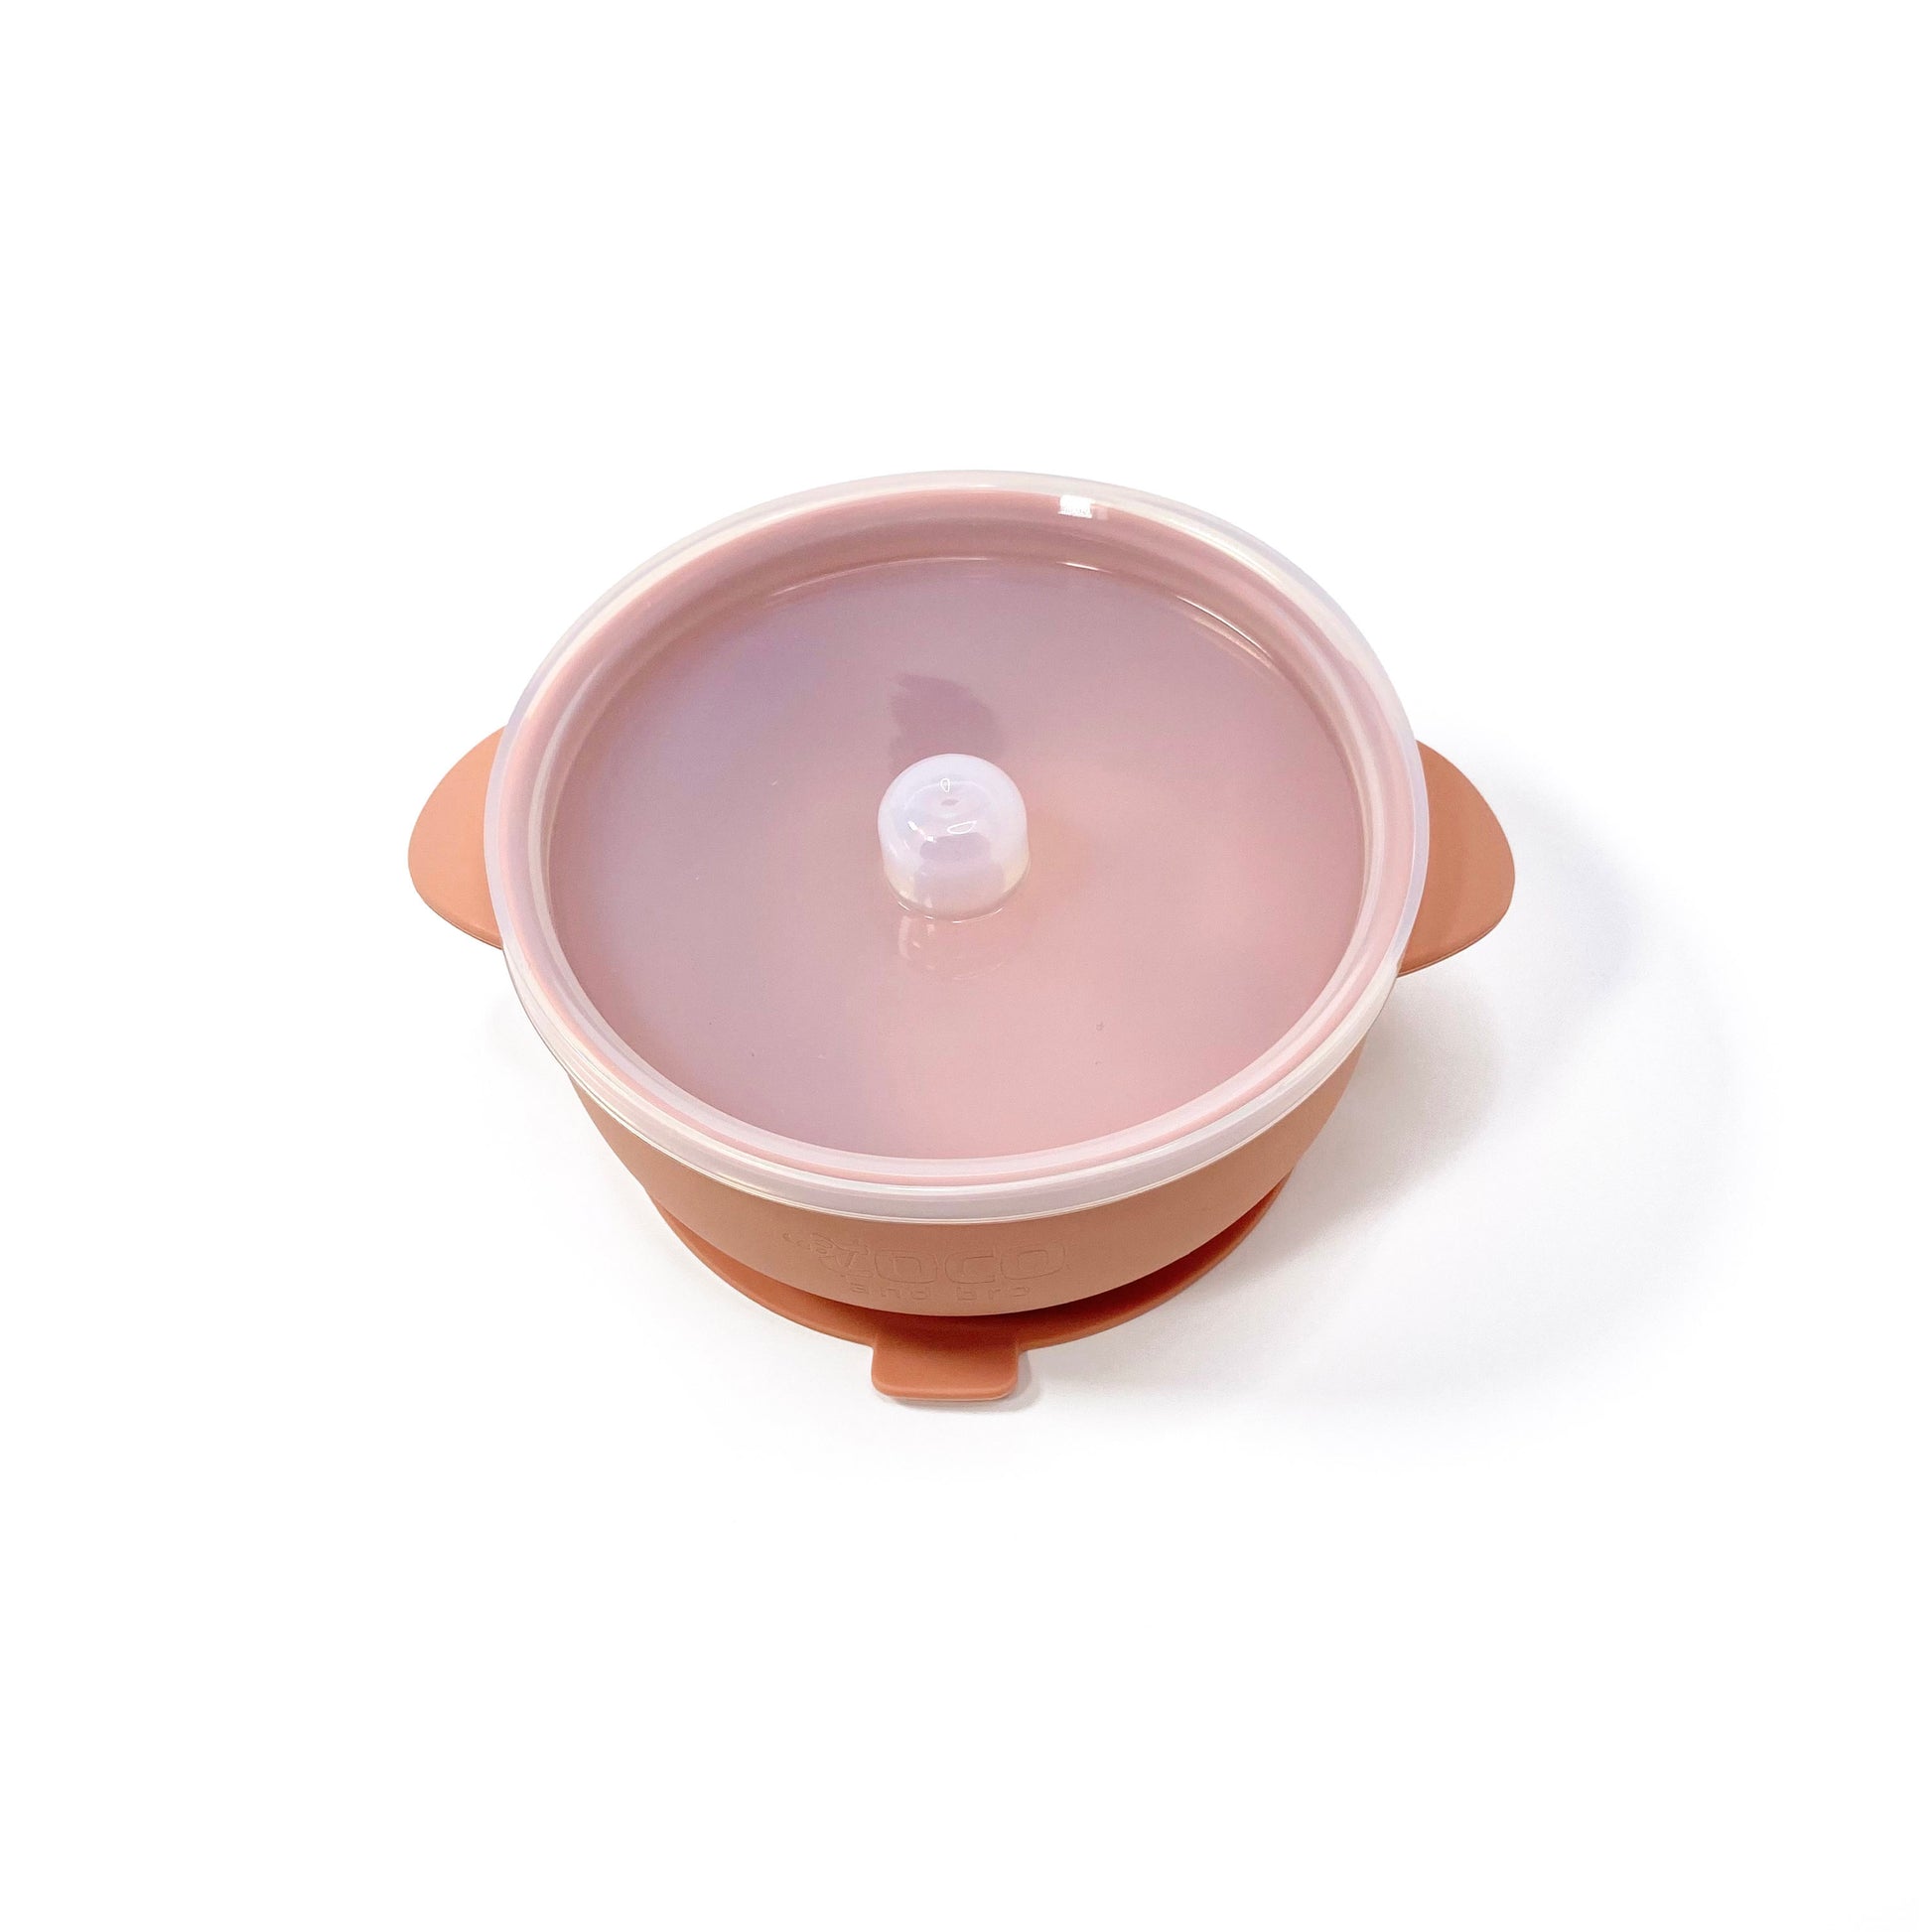 A sunset orange silicone children’s feeding bowl, with lid and suction cup. Image shows the bowl with lid attached.